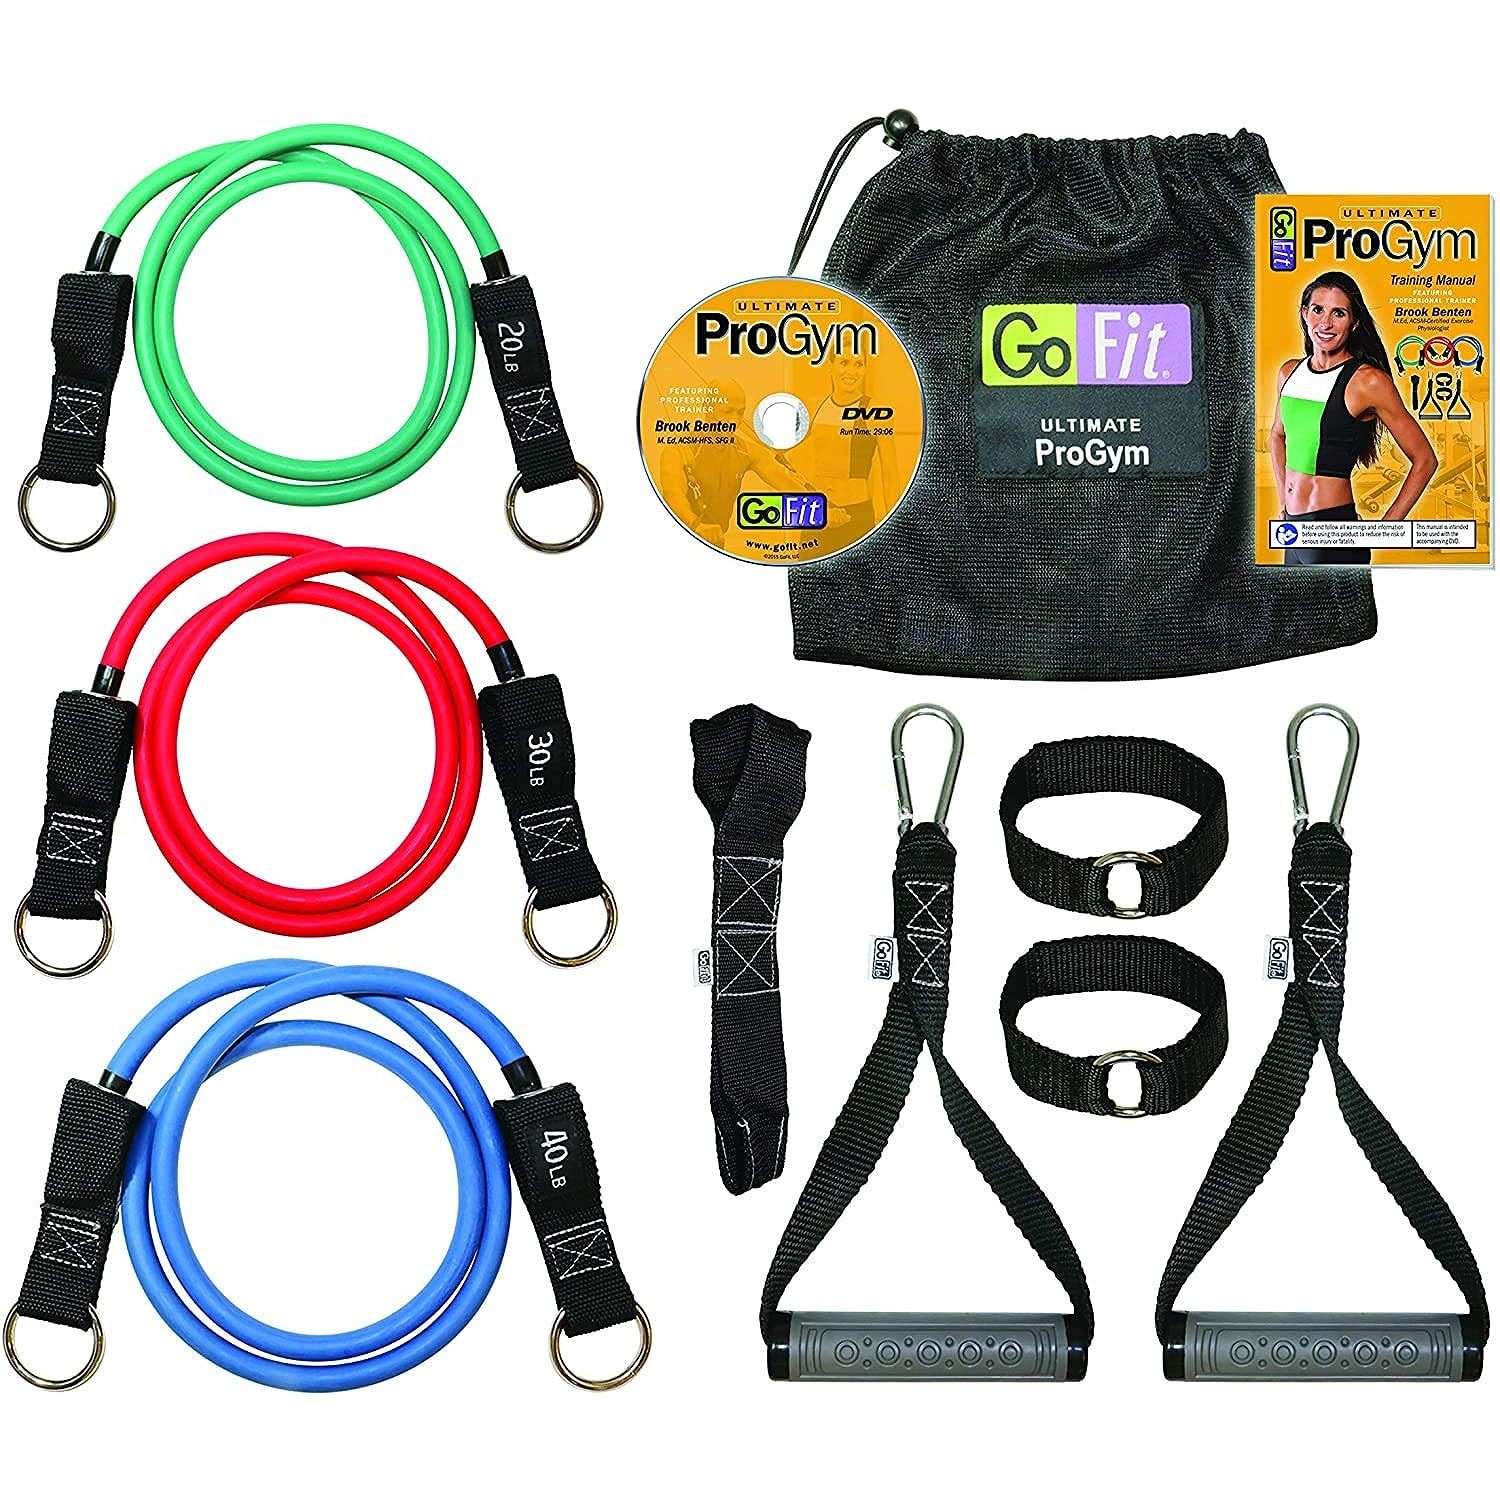 Primary image for GoFit Ultimate ProGym - Portable Fitness Equipment,Multicolored,One Size,1077803